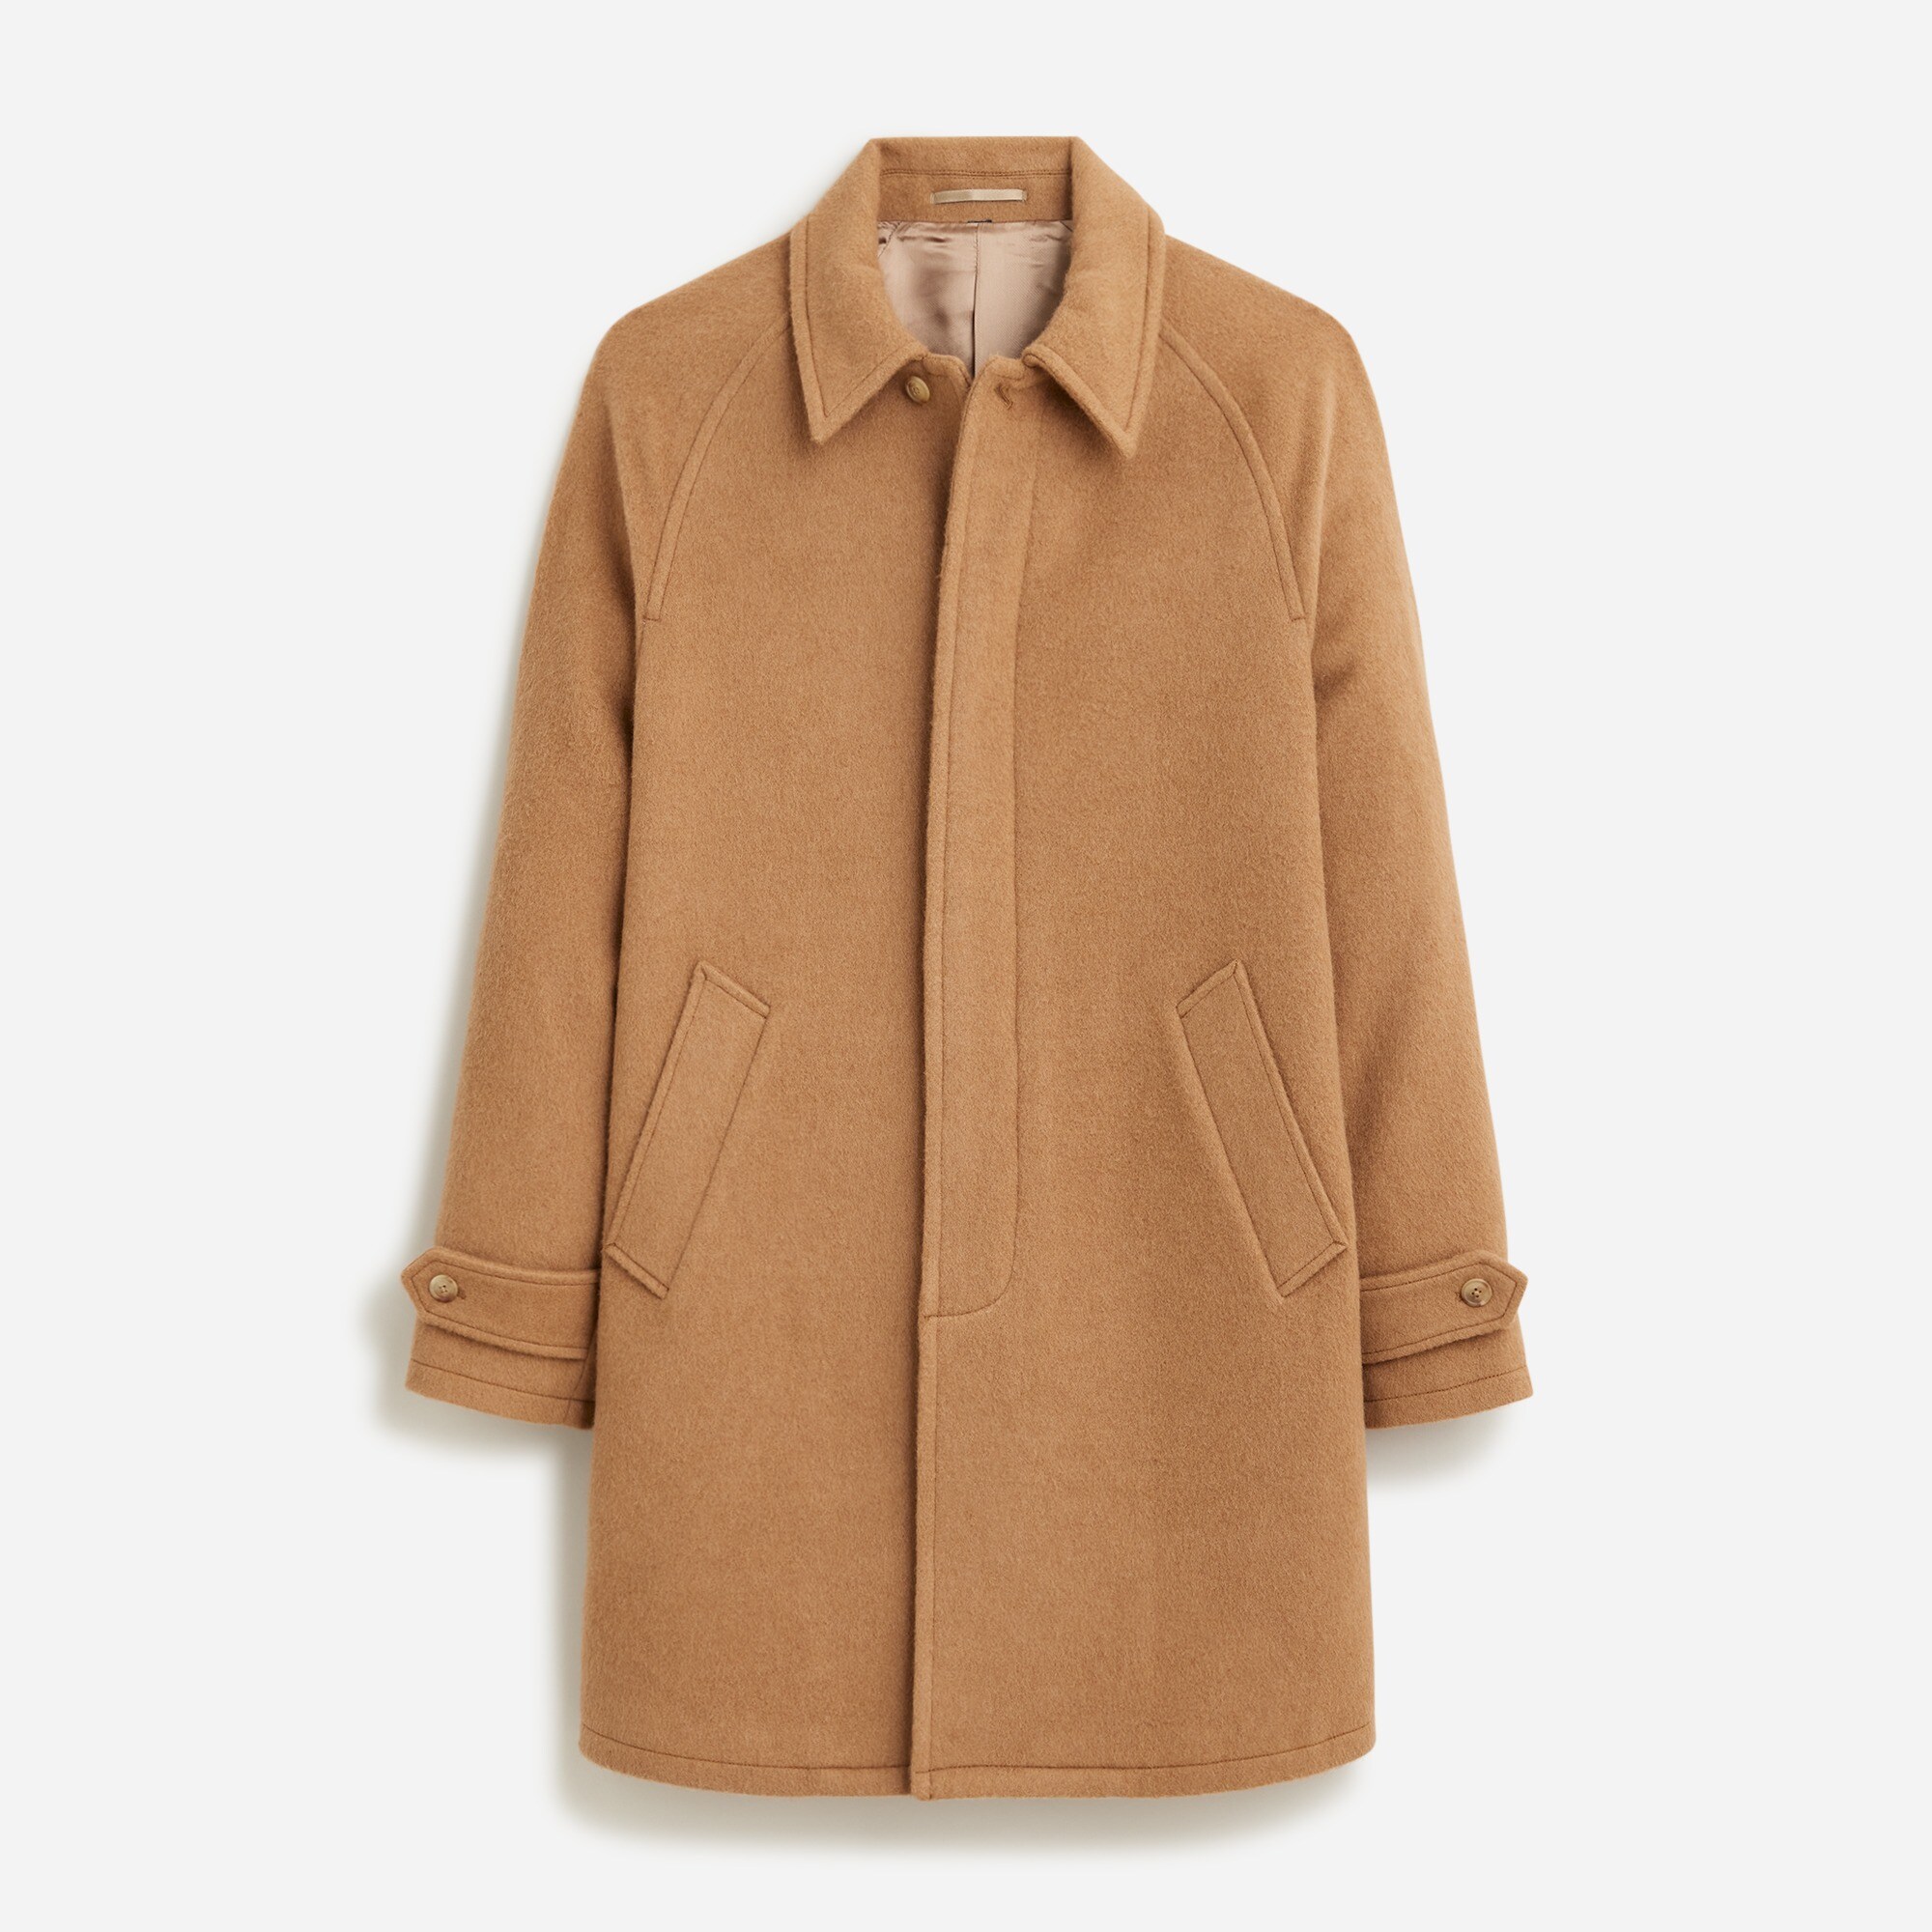  Limited-edition Ludlow car coat in English camel hair